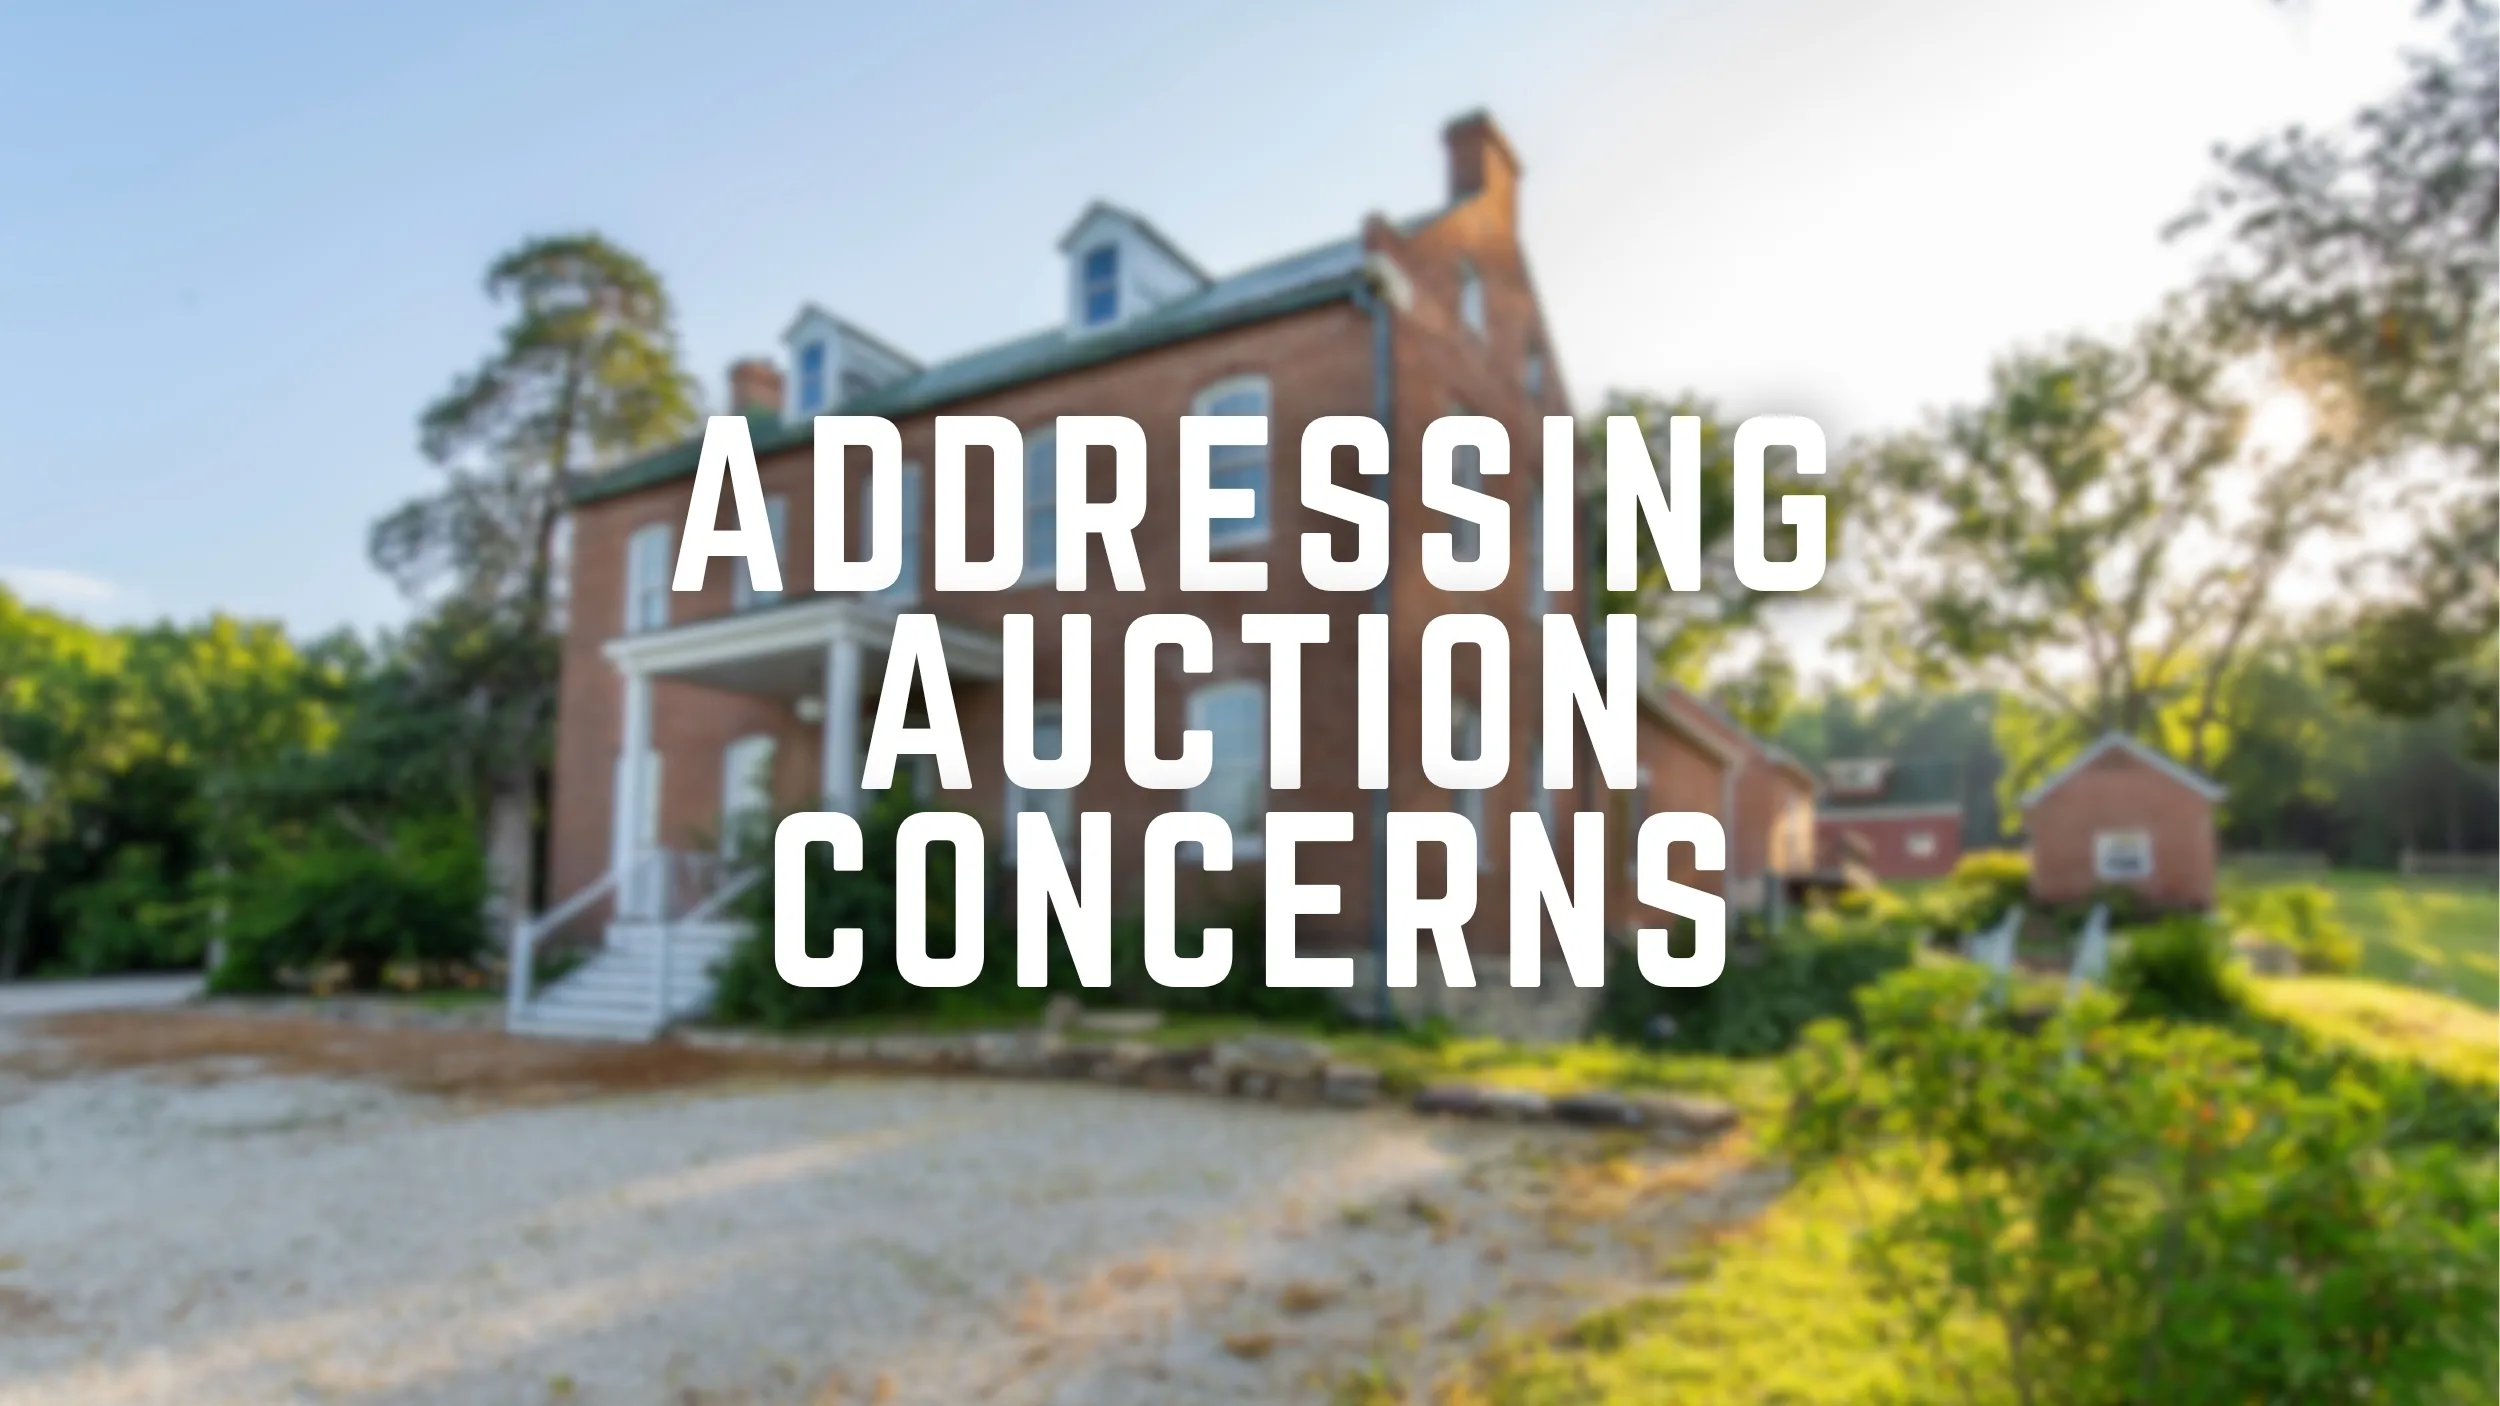 Addressing Concerns about Auctions